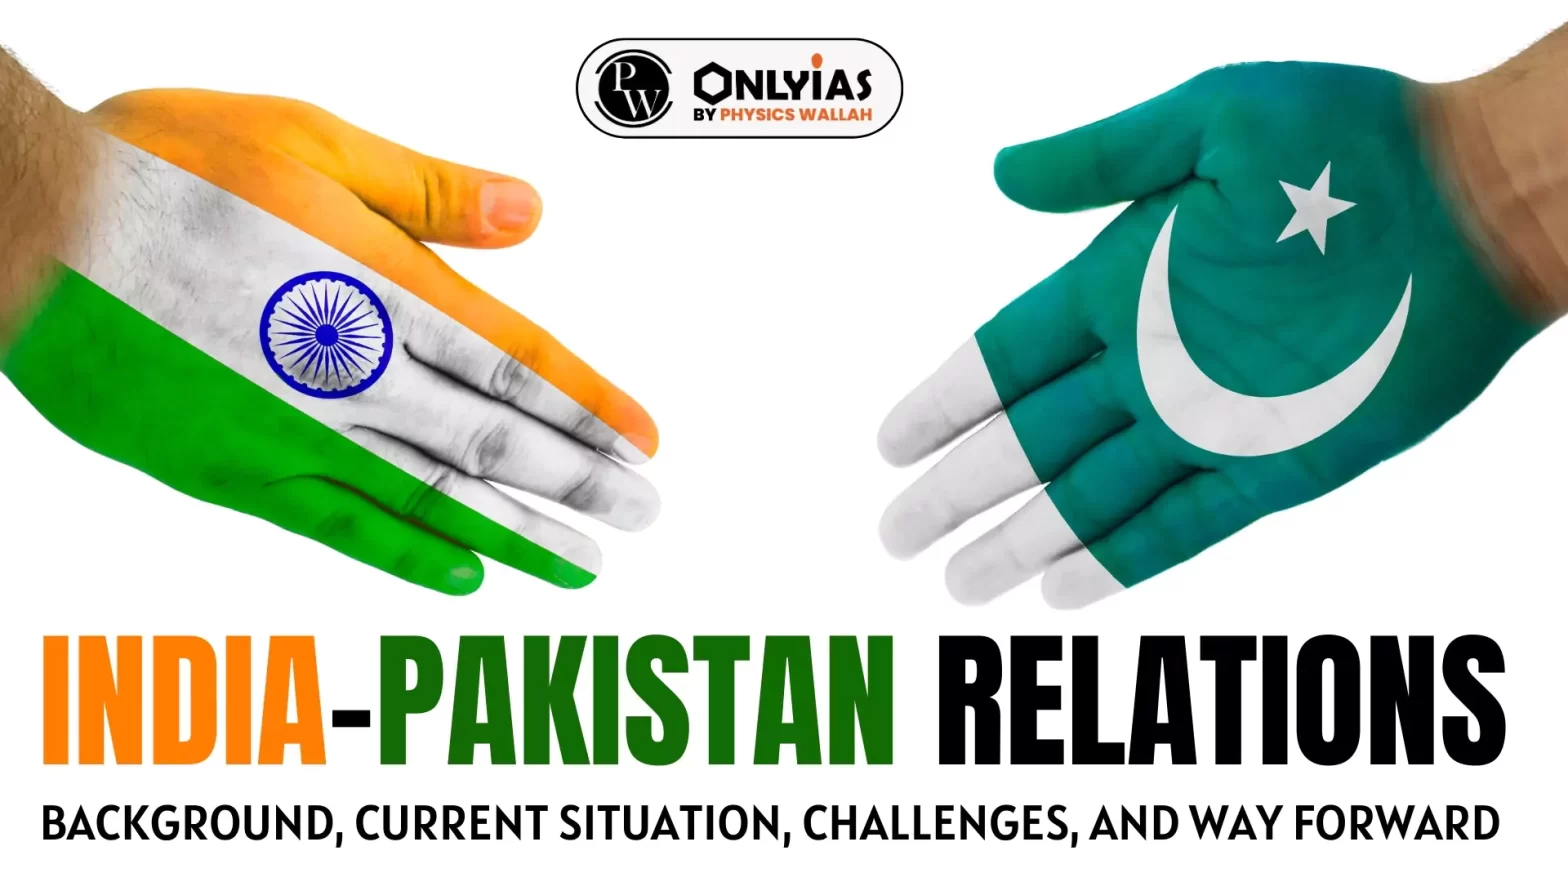 India Pakistan Relations: Background, Current Situation, Challenges, and Way Forward